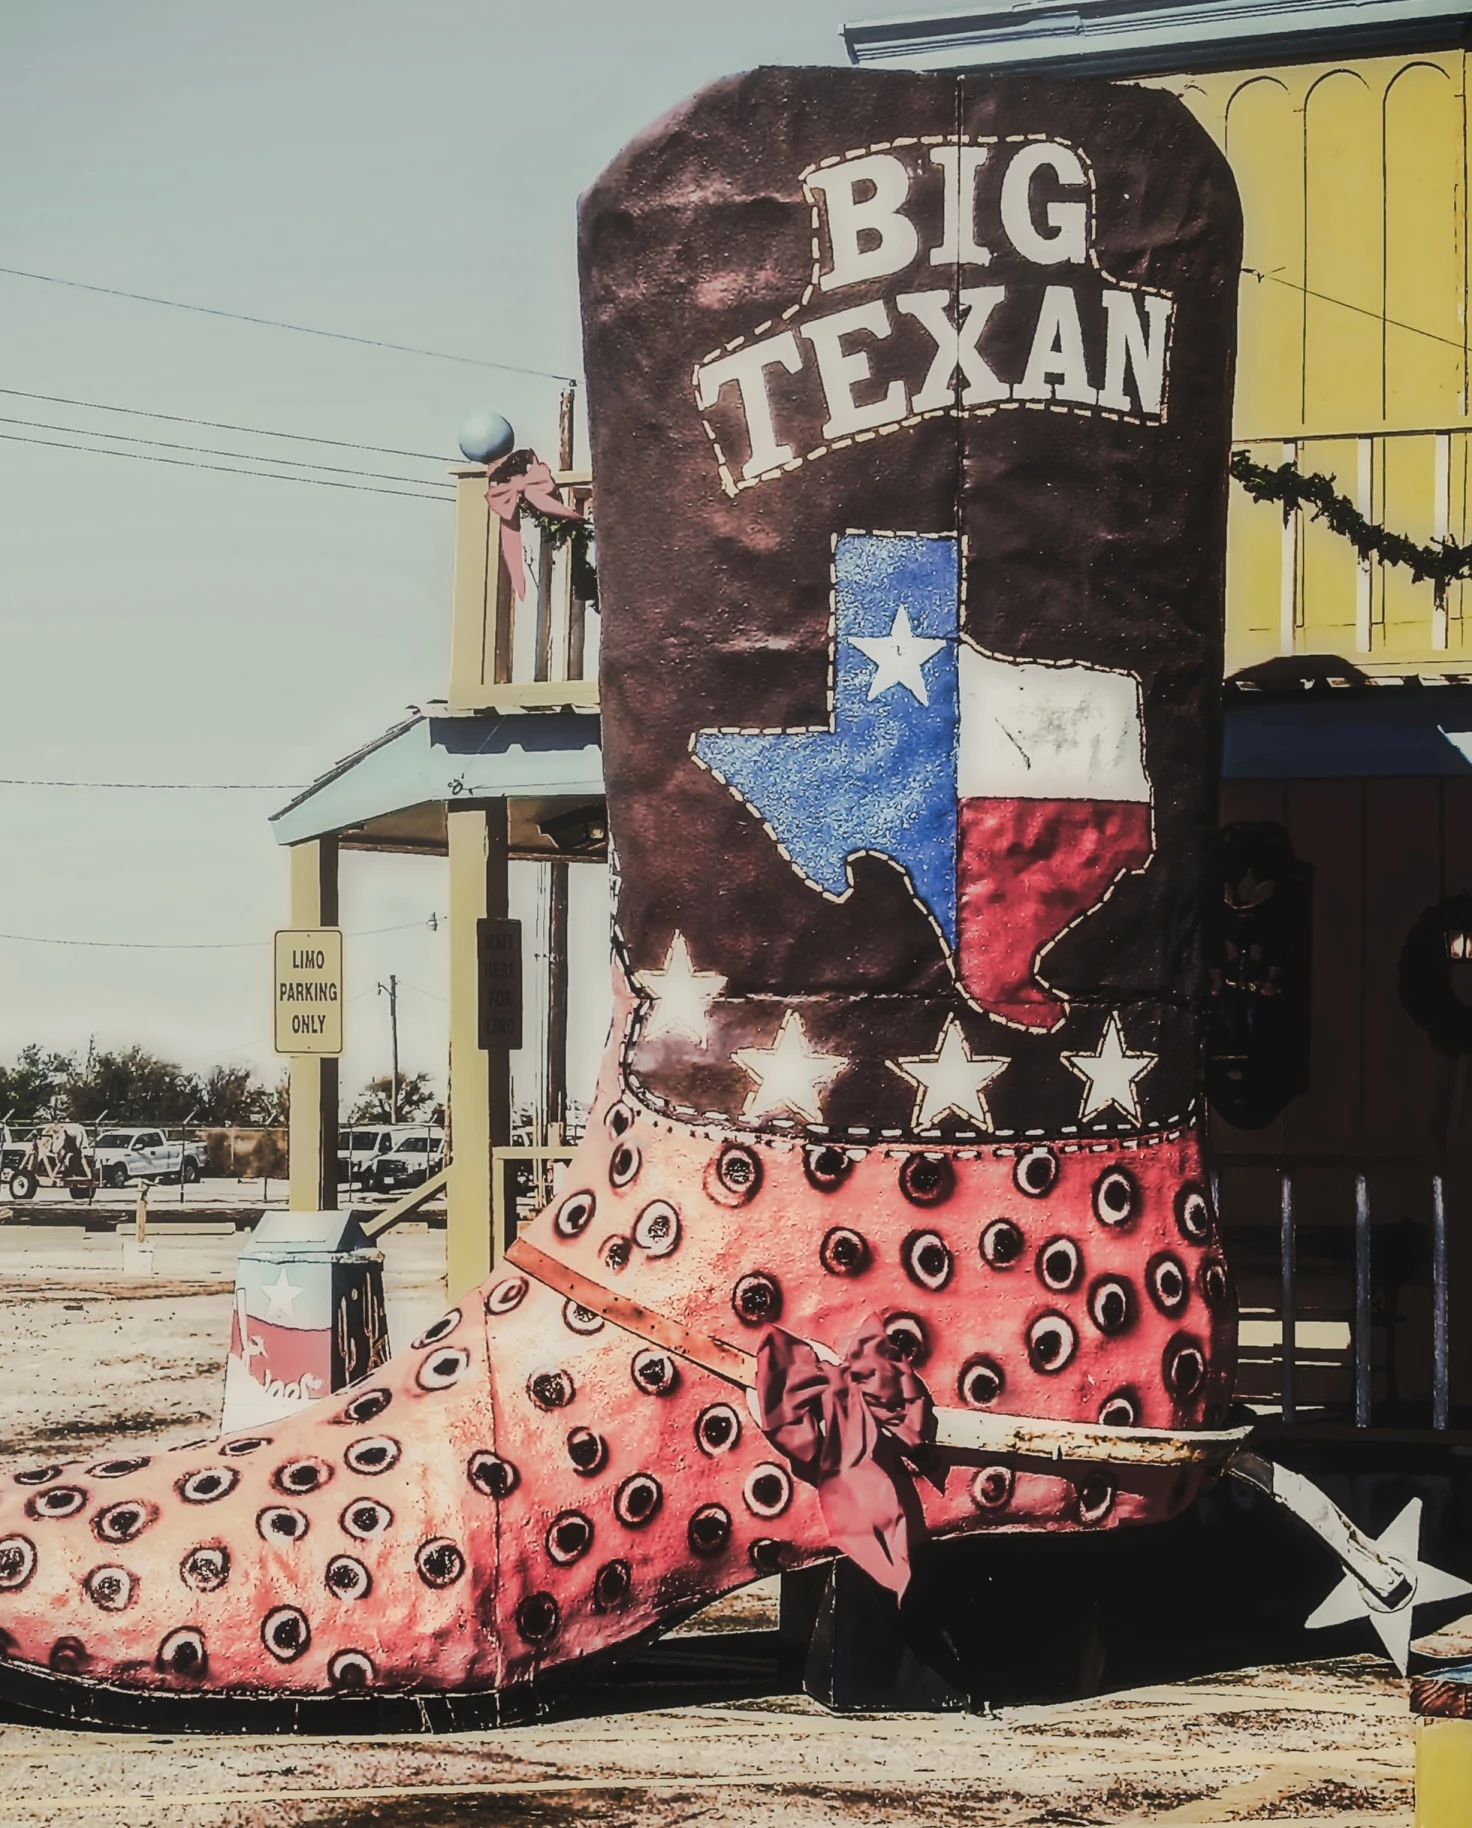 A long boot landmark with Texas flag and Big Texan written on it.